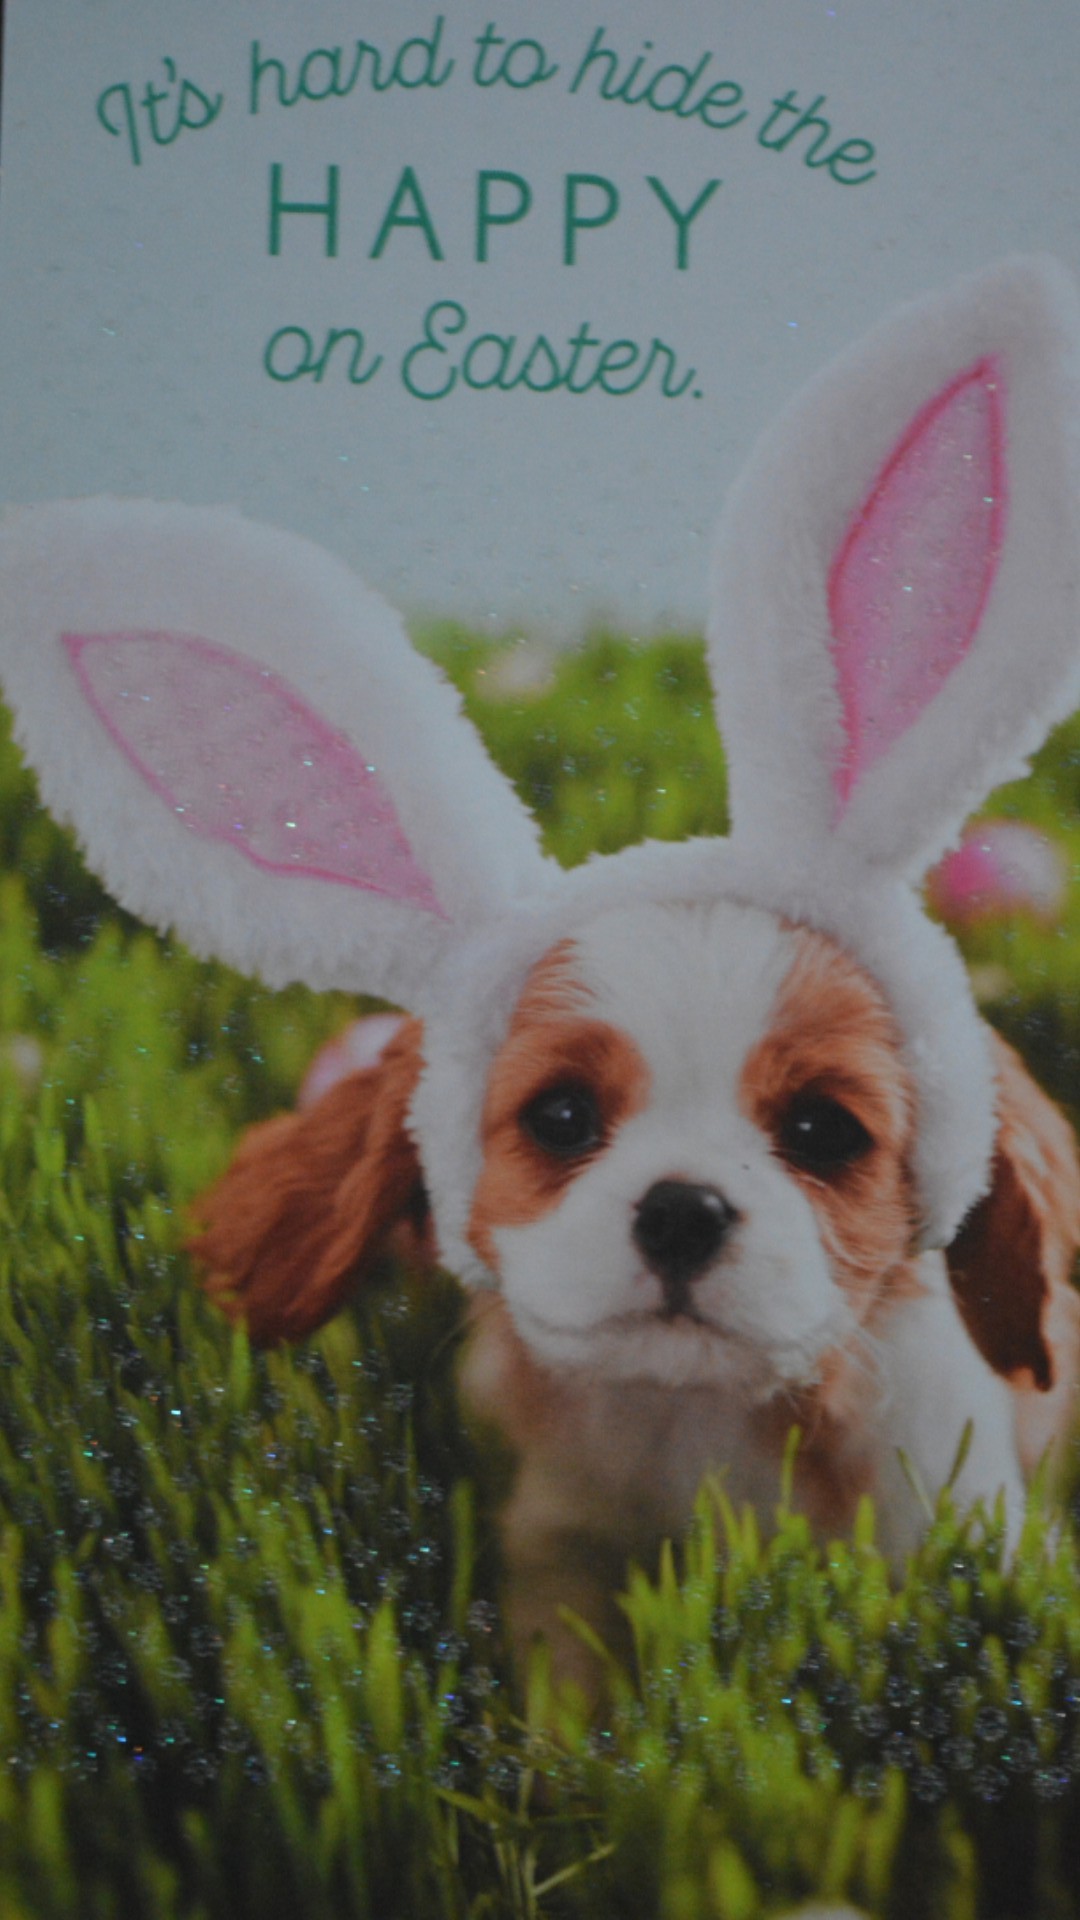 Send Easter cards to family members